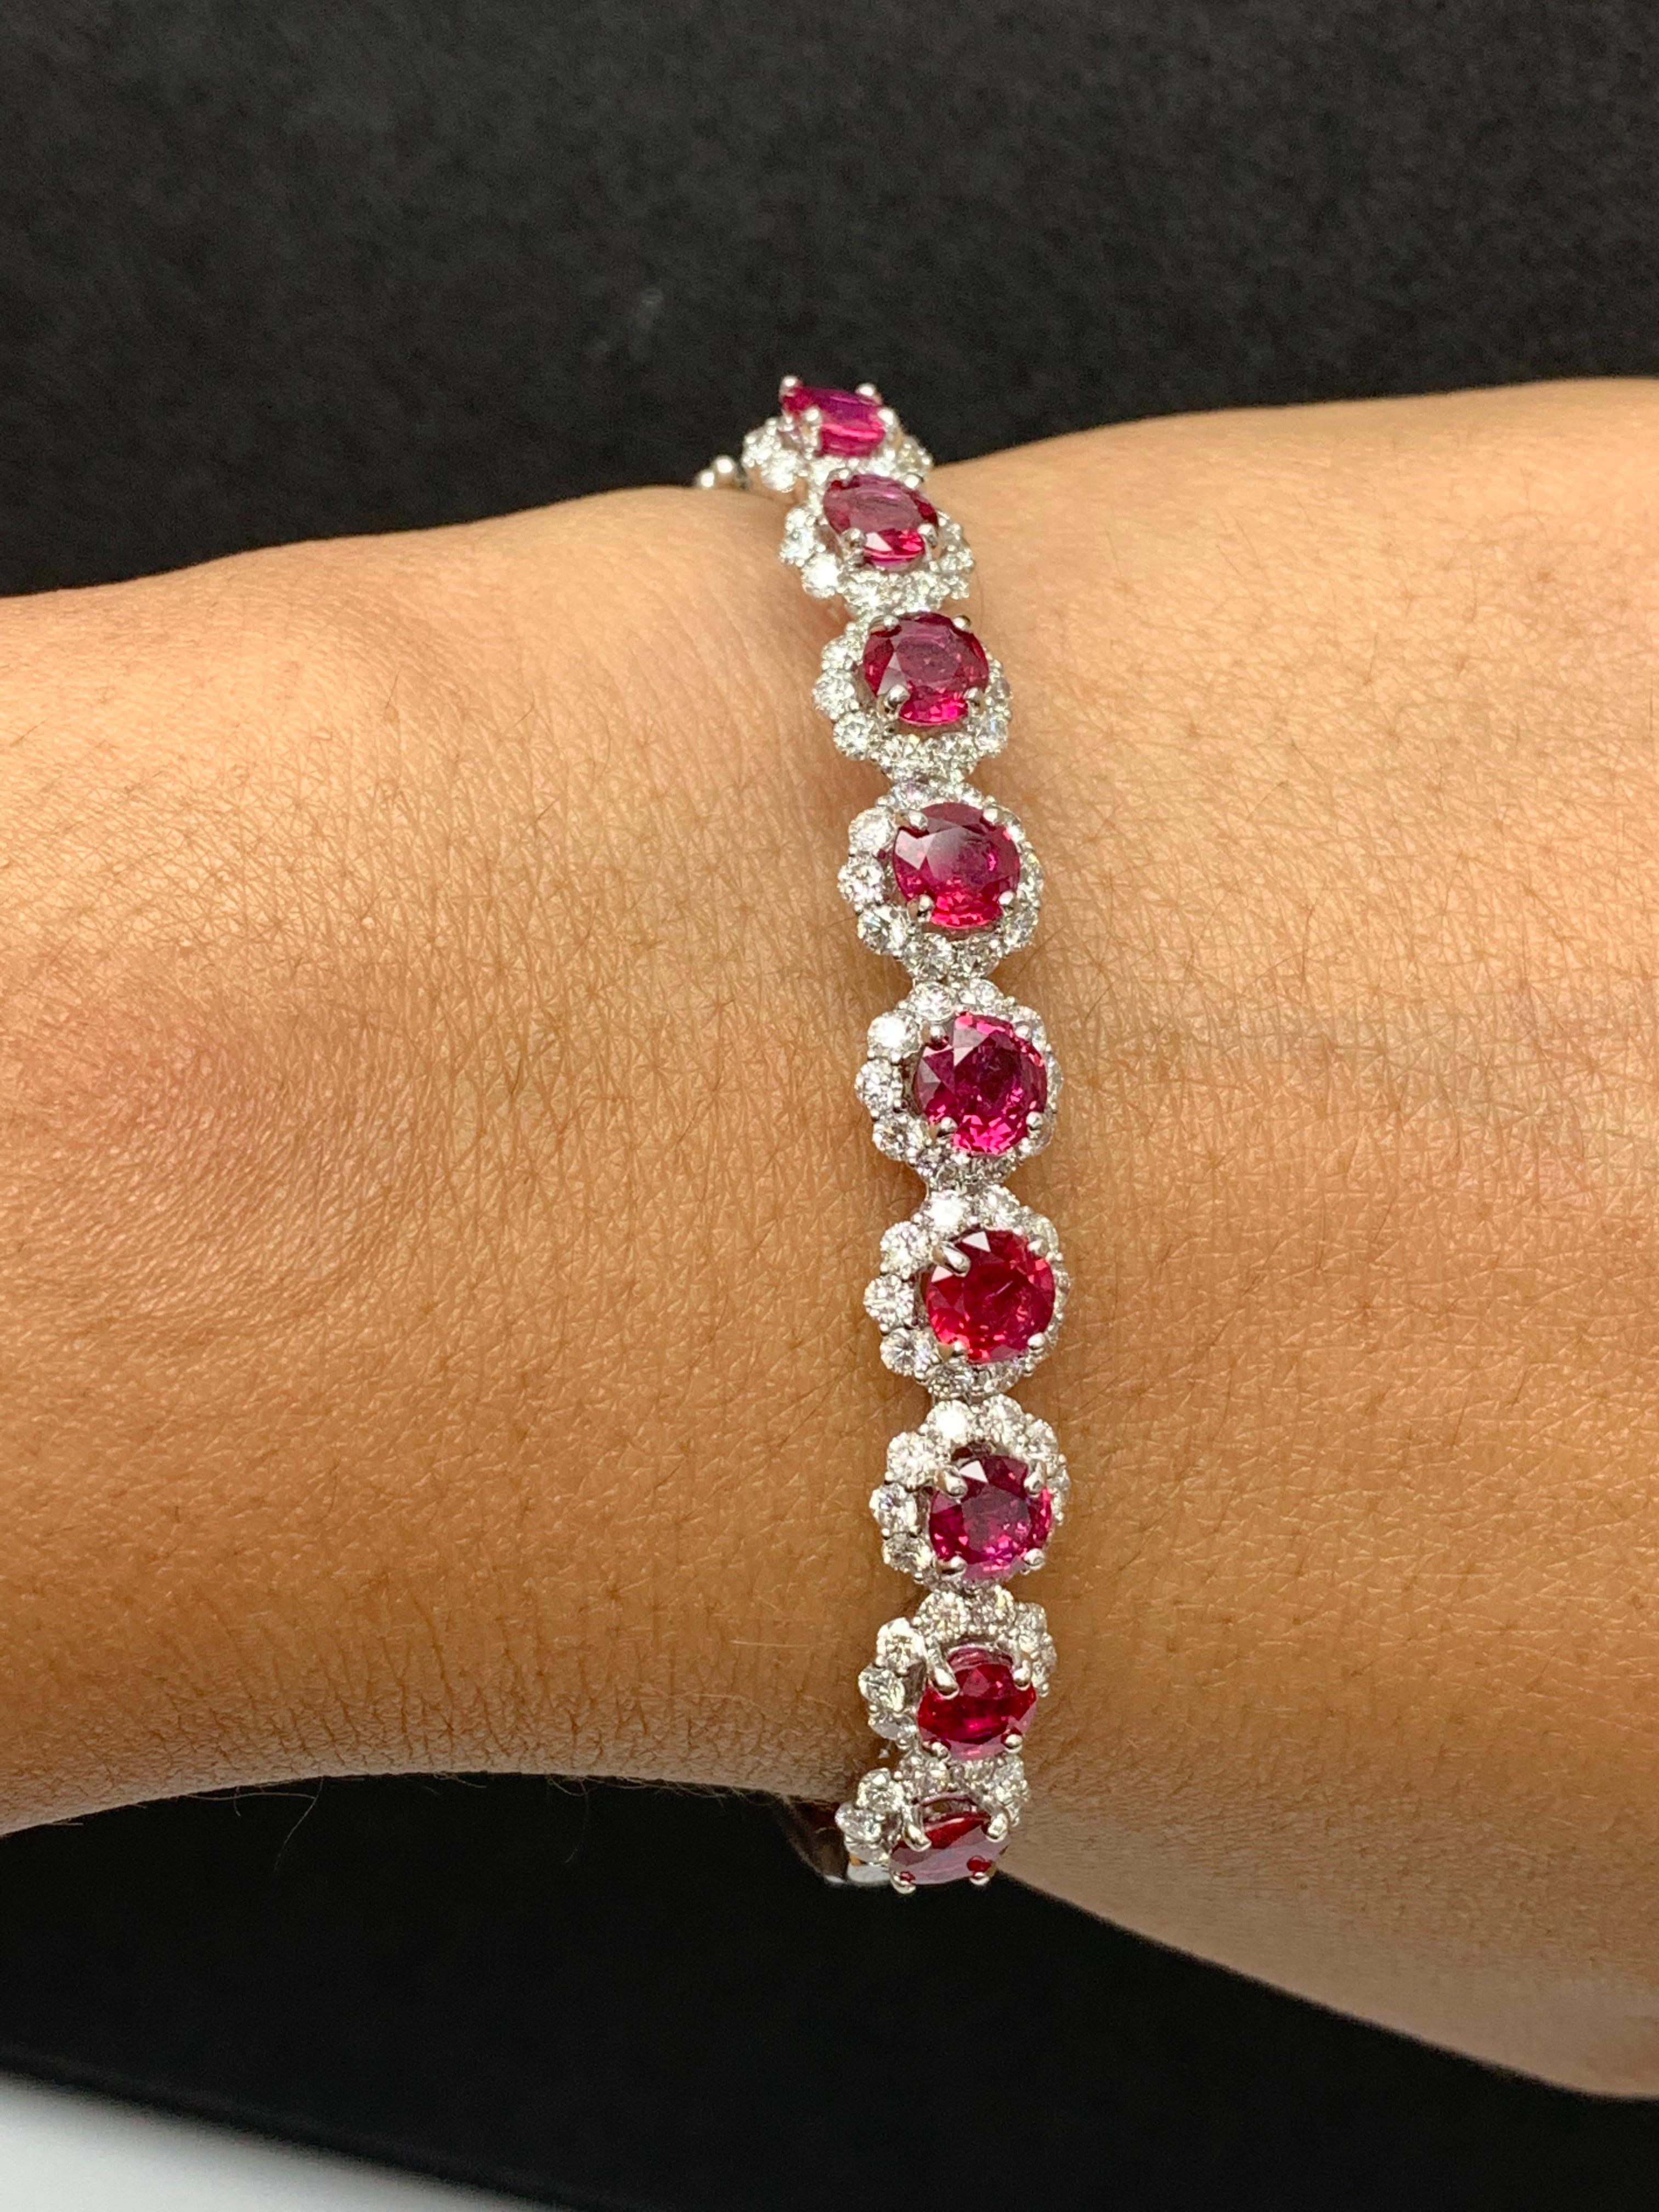 Sparkle in the spotlight with this brilliant cut ruby and diamond bangle bracelet. Features 9 brilliant-cut round rubies weighing 4.76 carats and surrounding the rubies are 90 diamonds weighing 2.45 carats elegantly set in an 18k white gold basket.